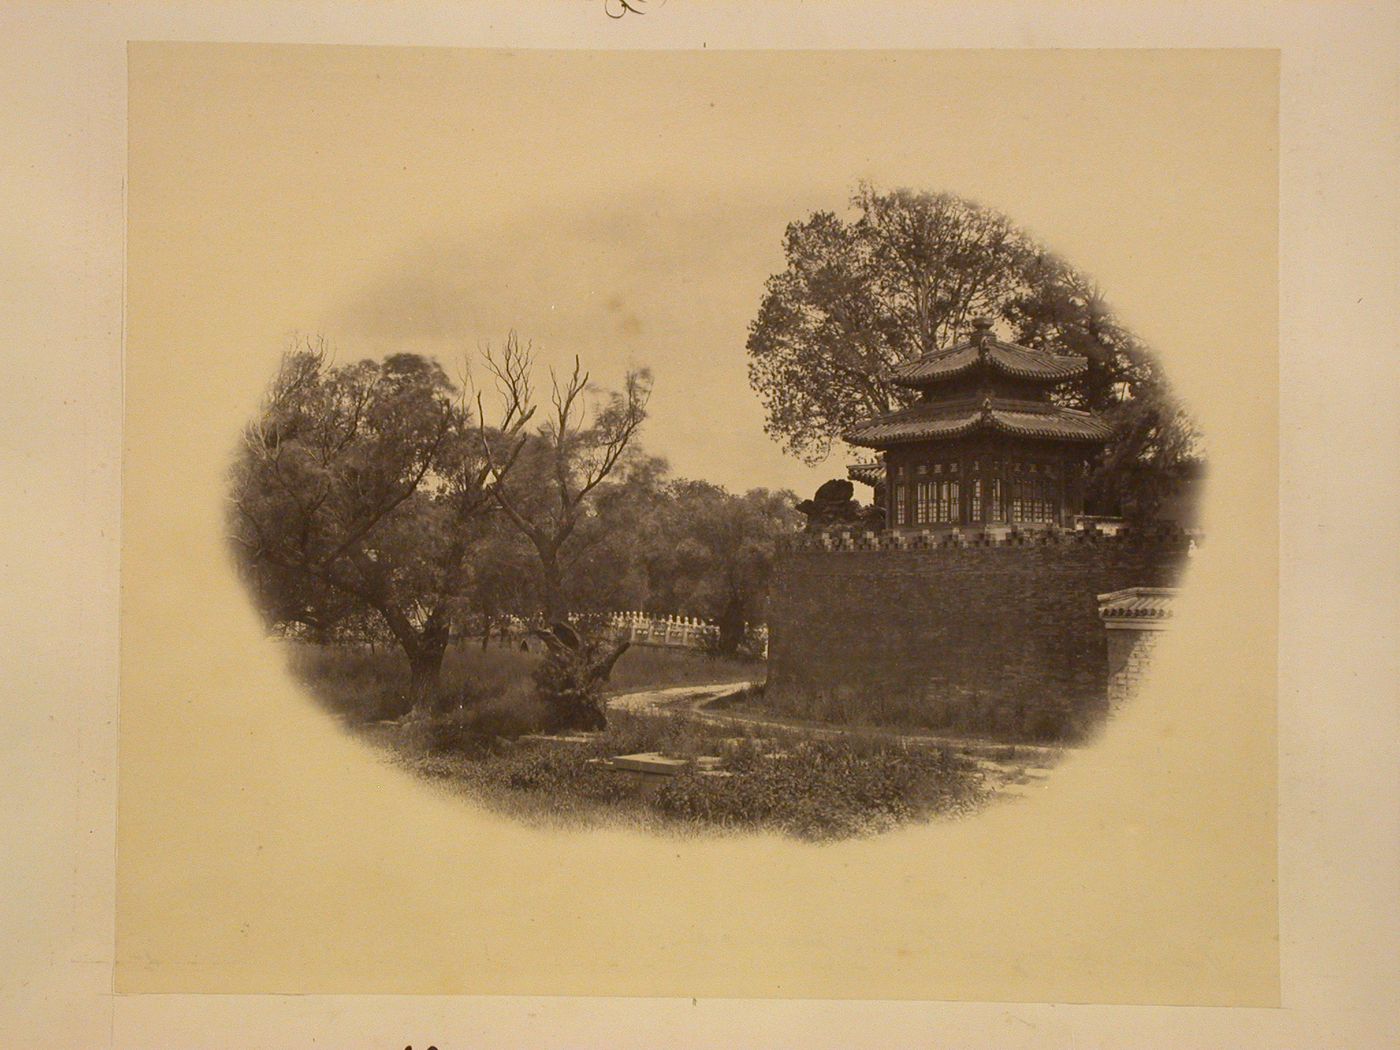 View of the wall of the Round City [Tuancheng] and a building with the Bridge of Everlasting Peace [Yong'an Bridge] in the background, Beihai (now Beihai Park), Peking (now Beijing), China